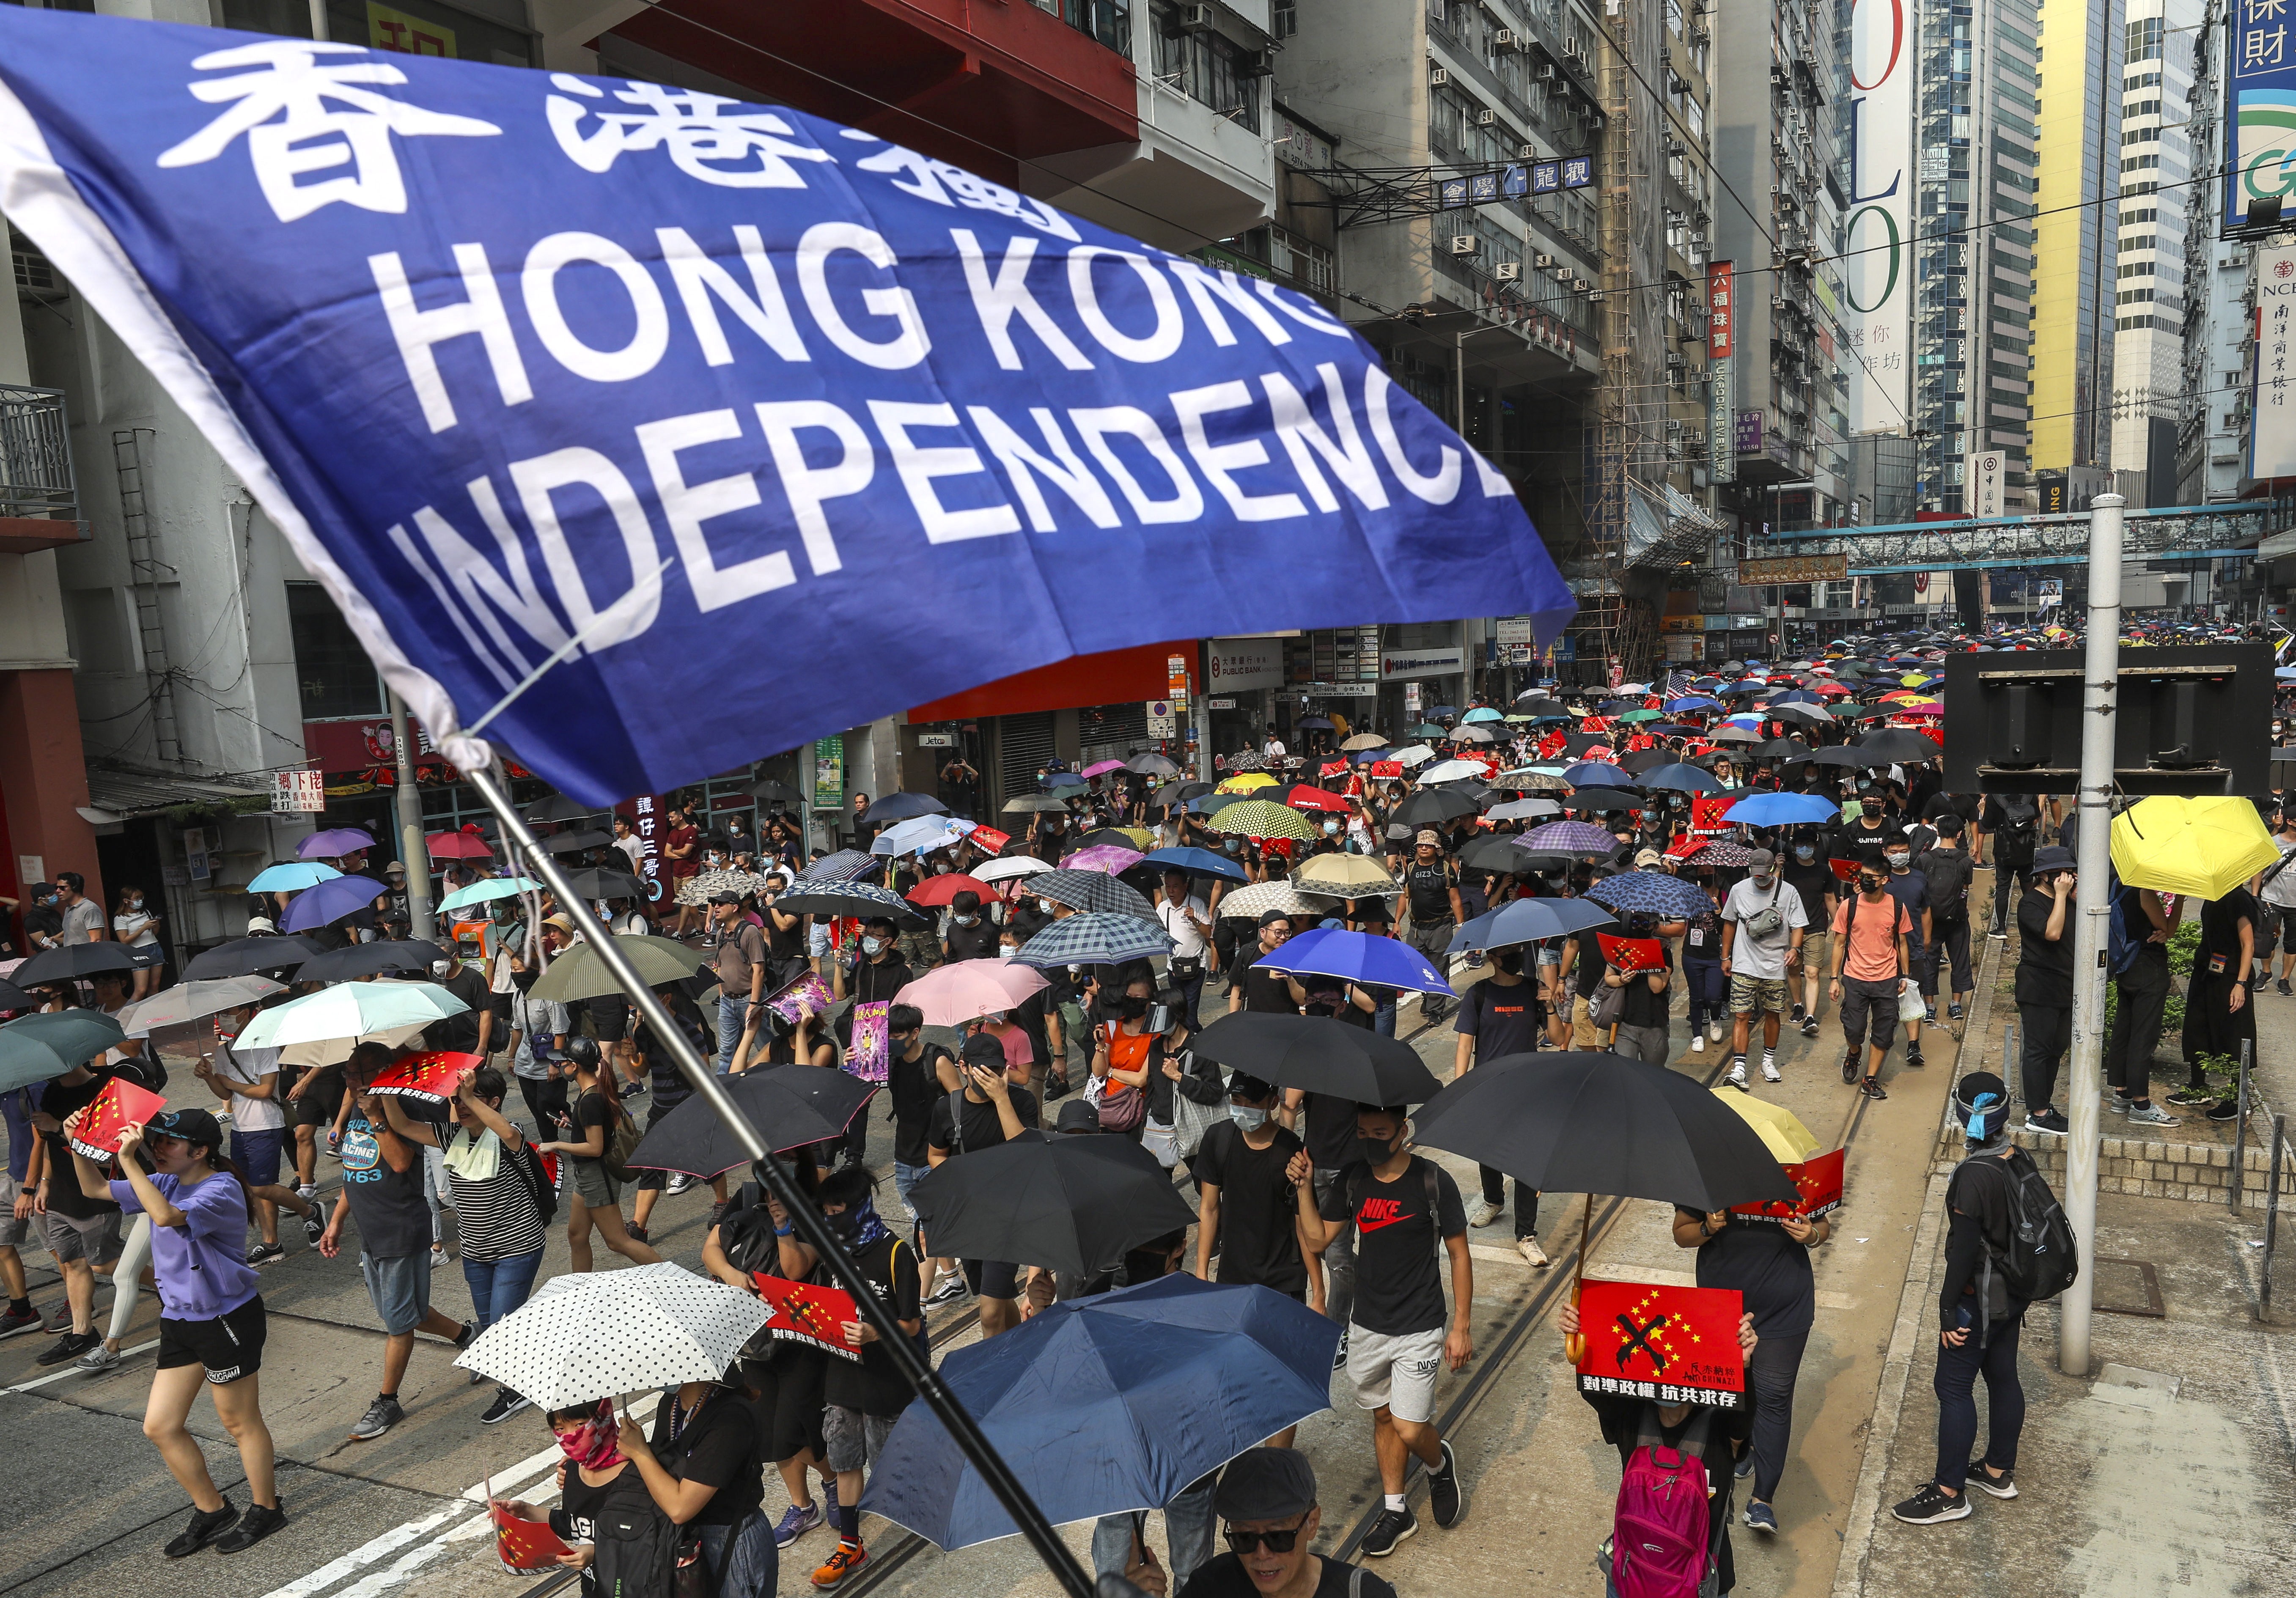 A protester holds up a “Hong Kong independence” flag during a march against the government’s extradition bill from Causeway Bay to Admiralty on September 29. While not all protesters support Hong Kong independence, there is a widespread feeling that Hong Kong has a unique identity that is under threat and worth fighting for. Photo: Robert Ng